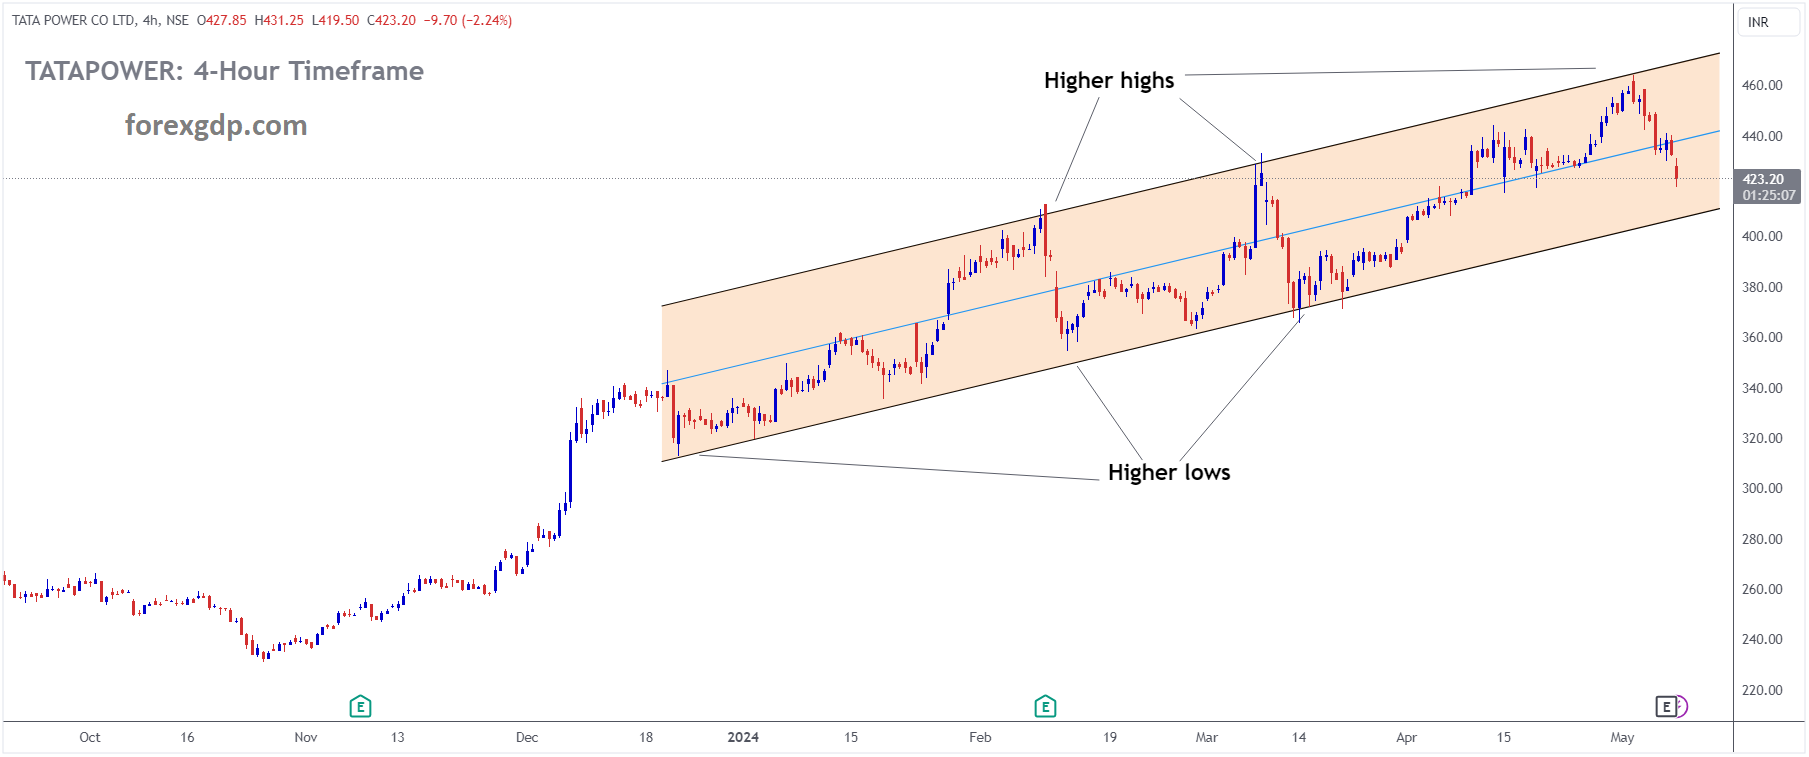 TATA POWER Market price is moving in Ascending channel and market has fallen from the higher high area of the channel